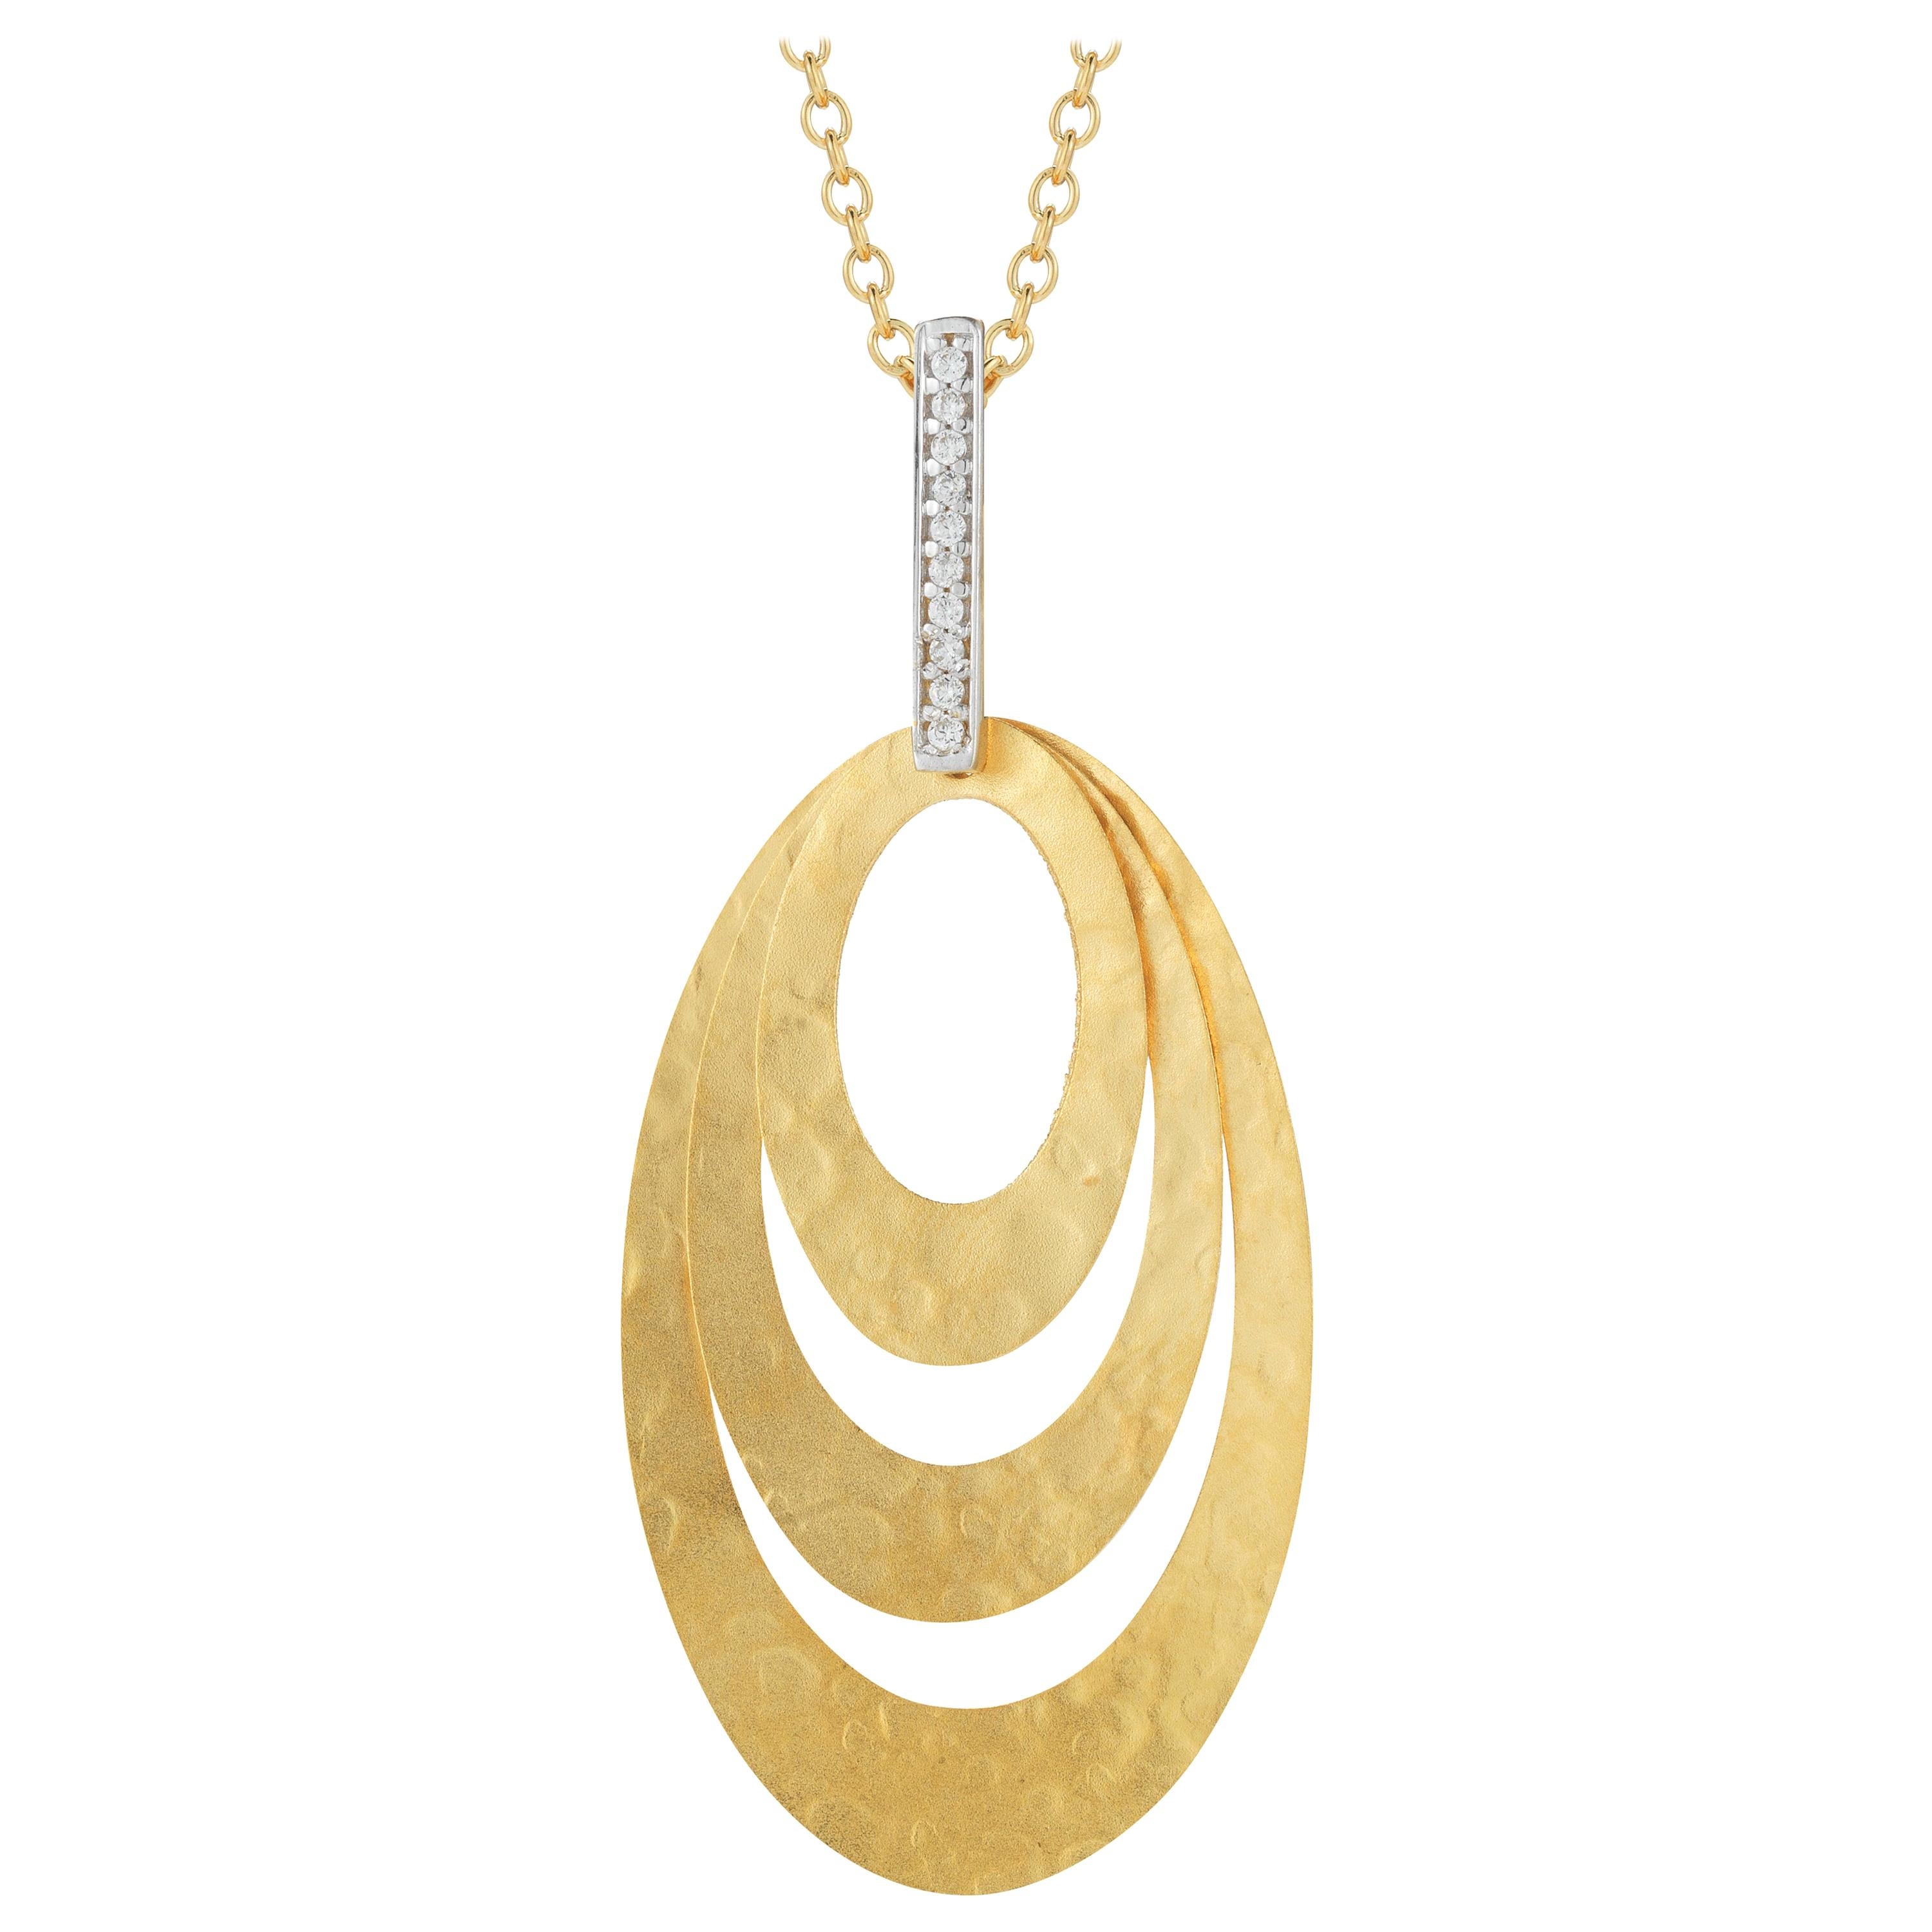 Handcrafted 14 Karat Yellow Gold Hammer-Finished Concentric-Ovals Pendant For Sale